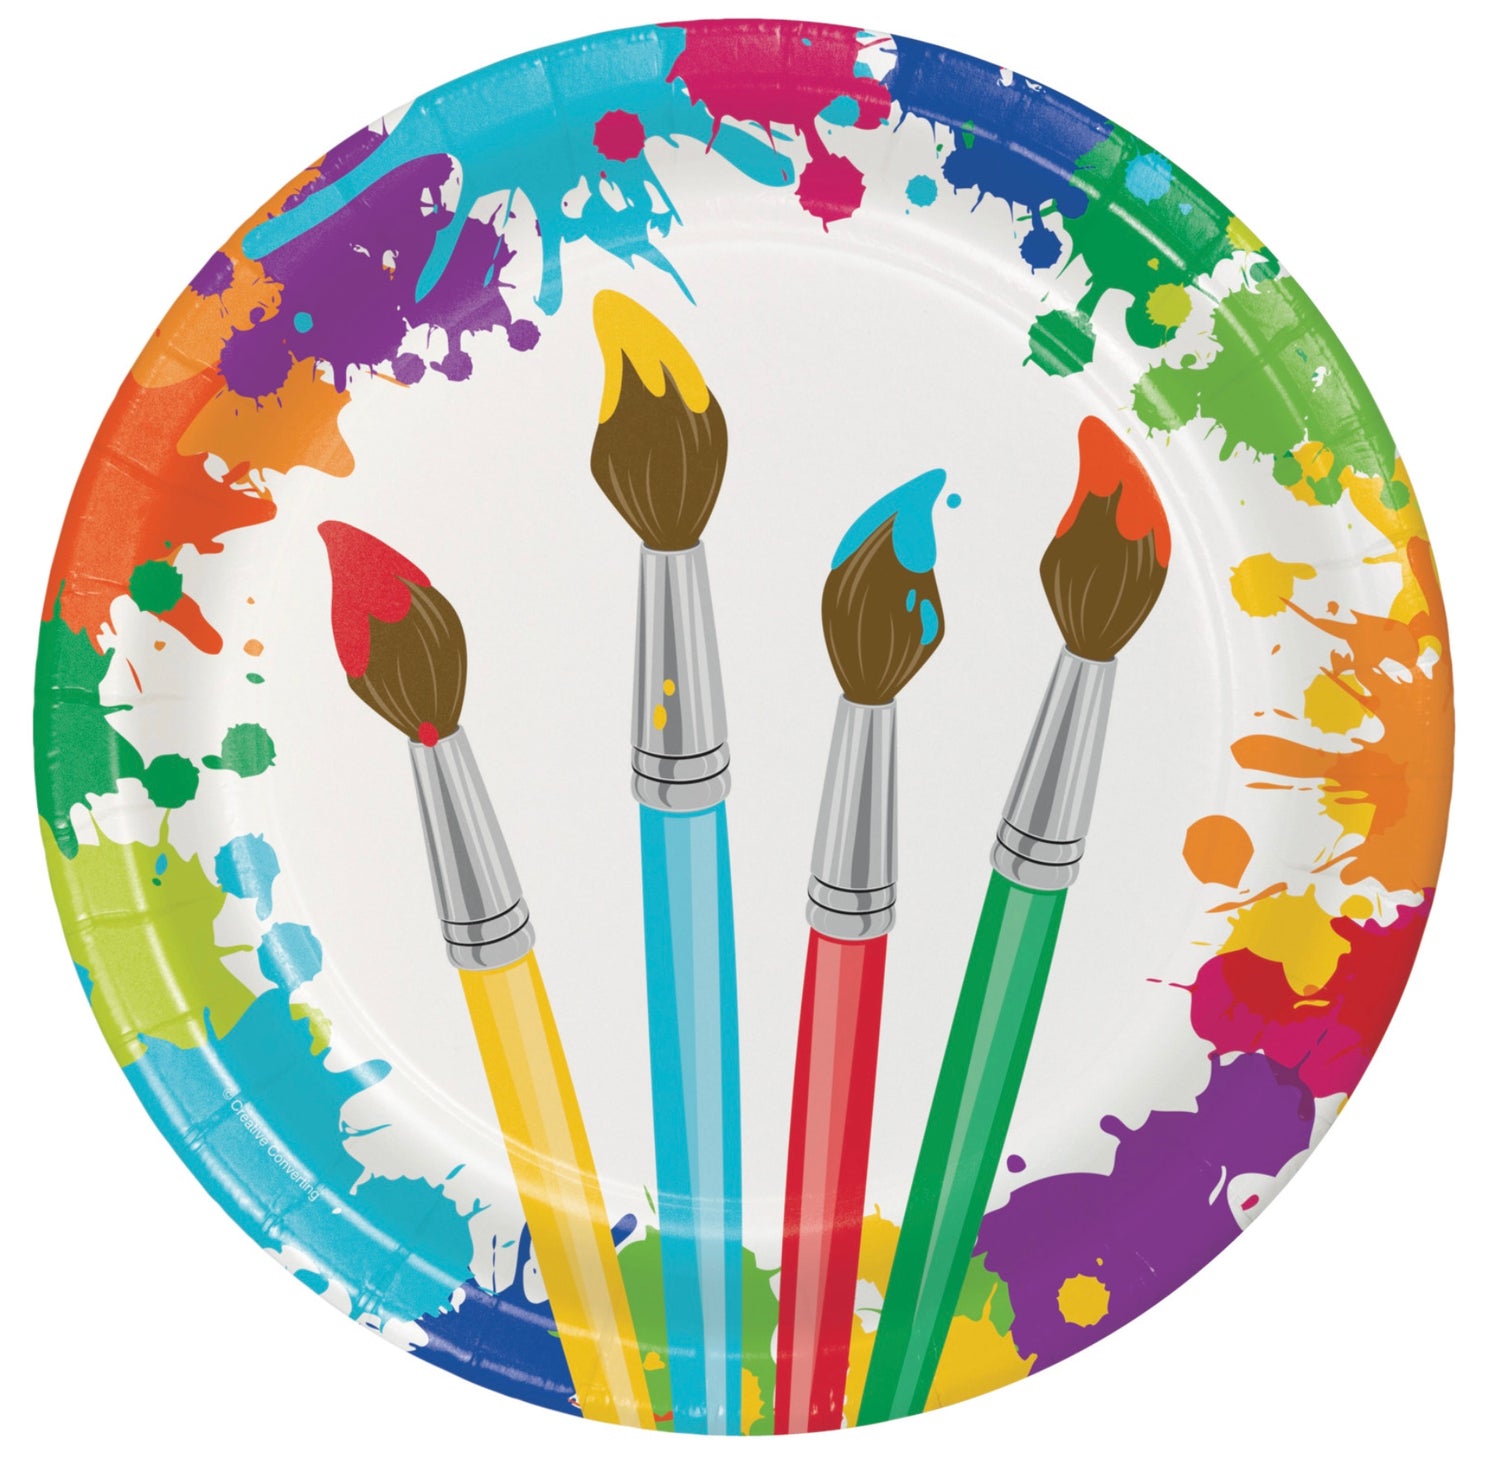 Sip & Paint Kids Painting Set - Party nStyle